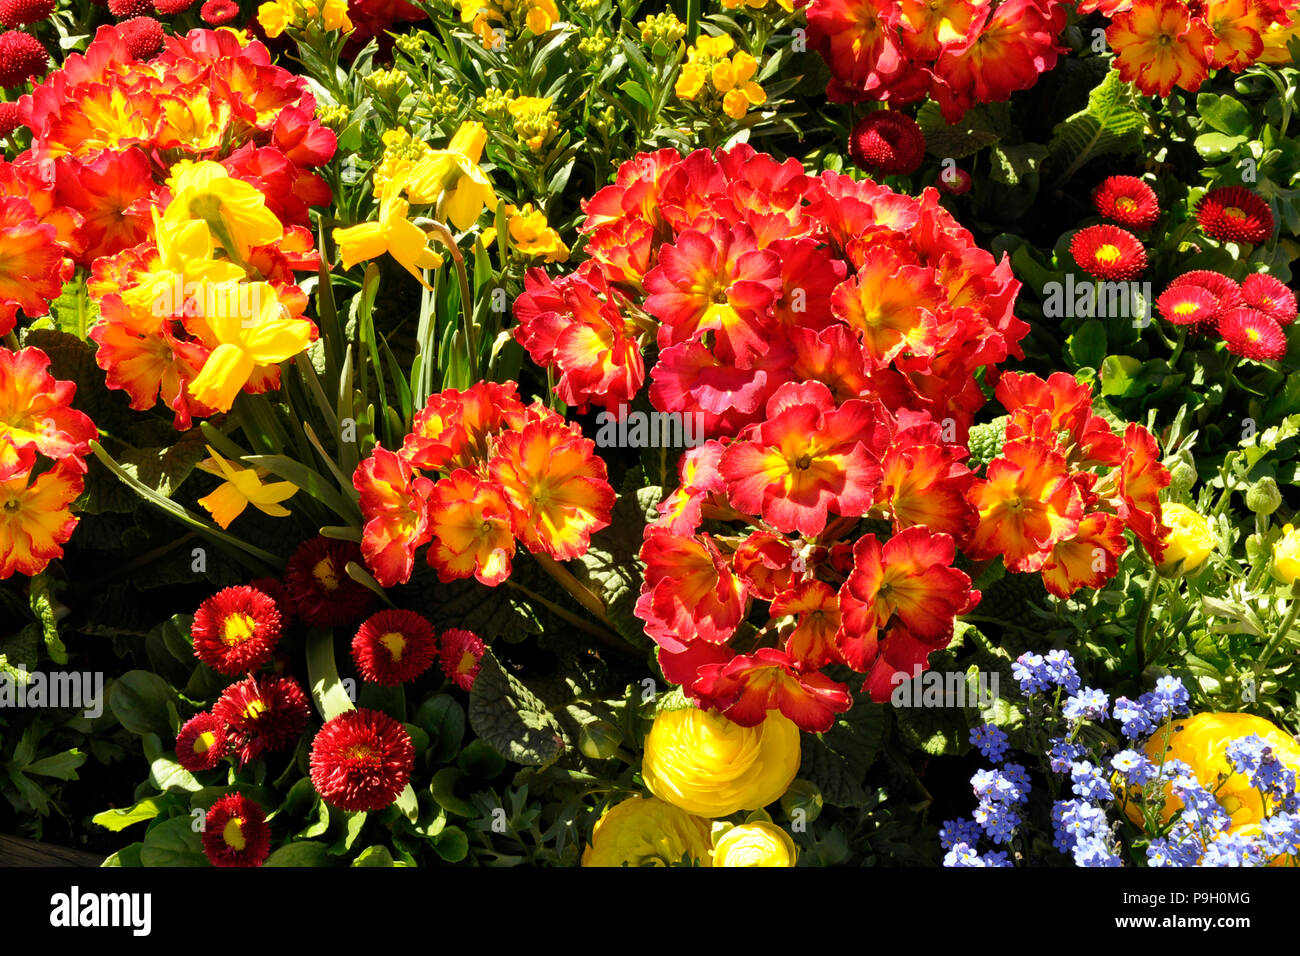 Flowers,buttercup,daffodils,cowslip,daisy Stock Photo